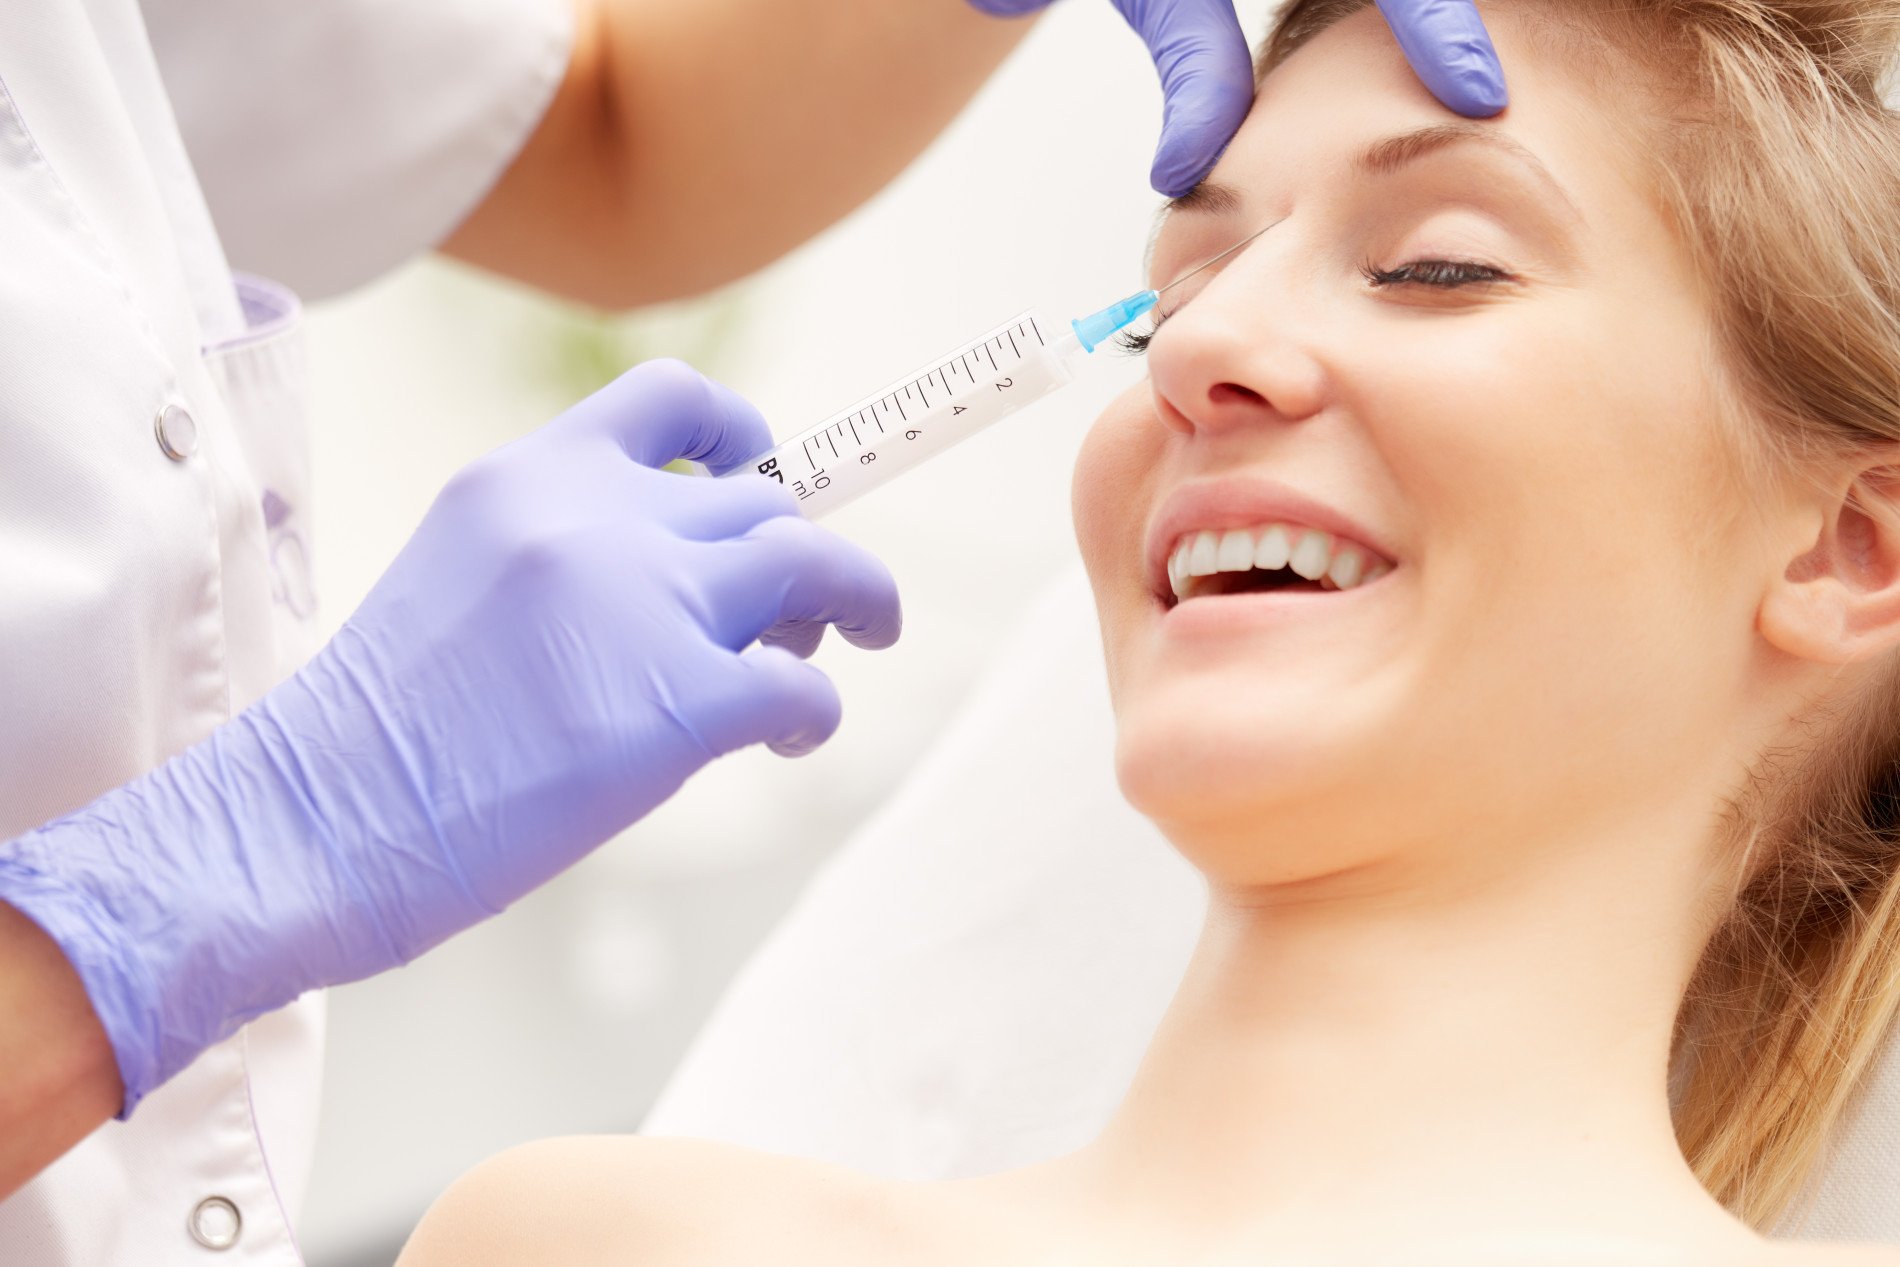 What are the Medical Benefits of Botox?